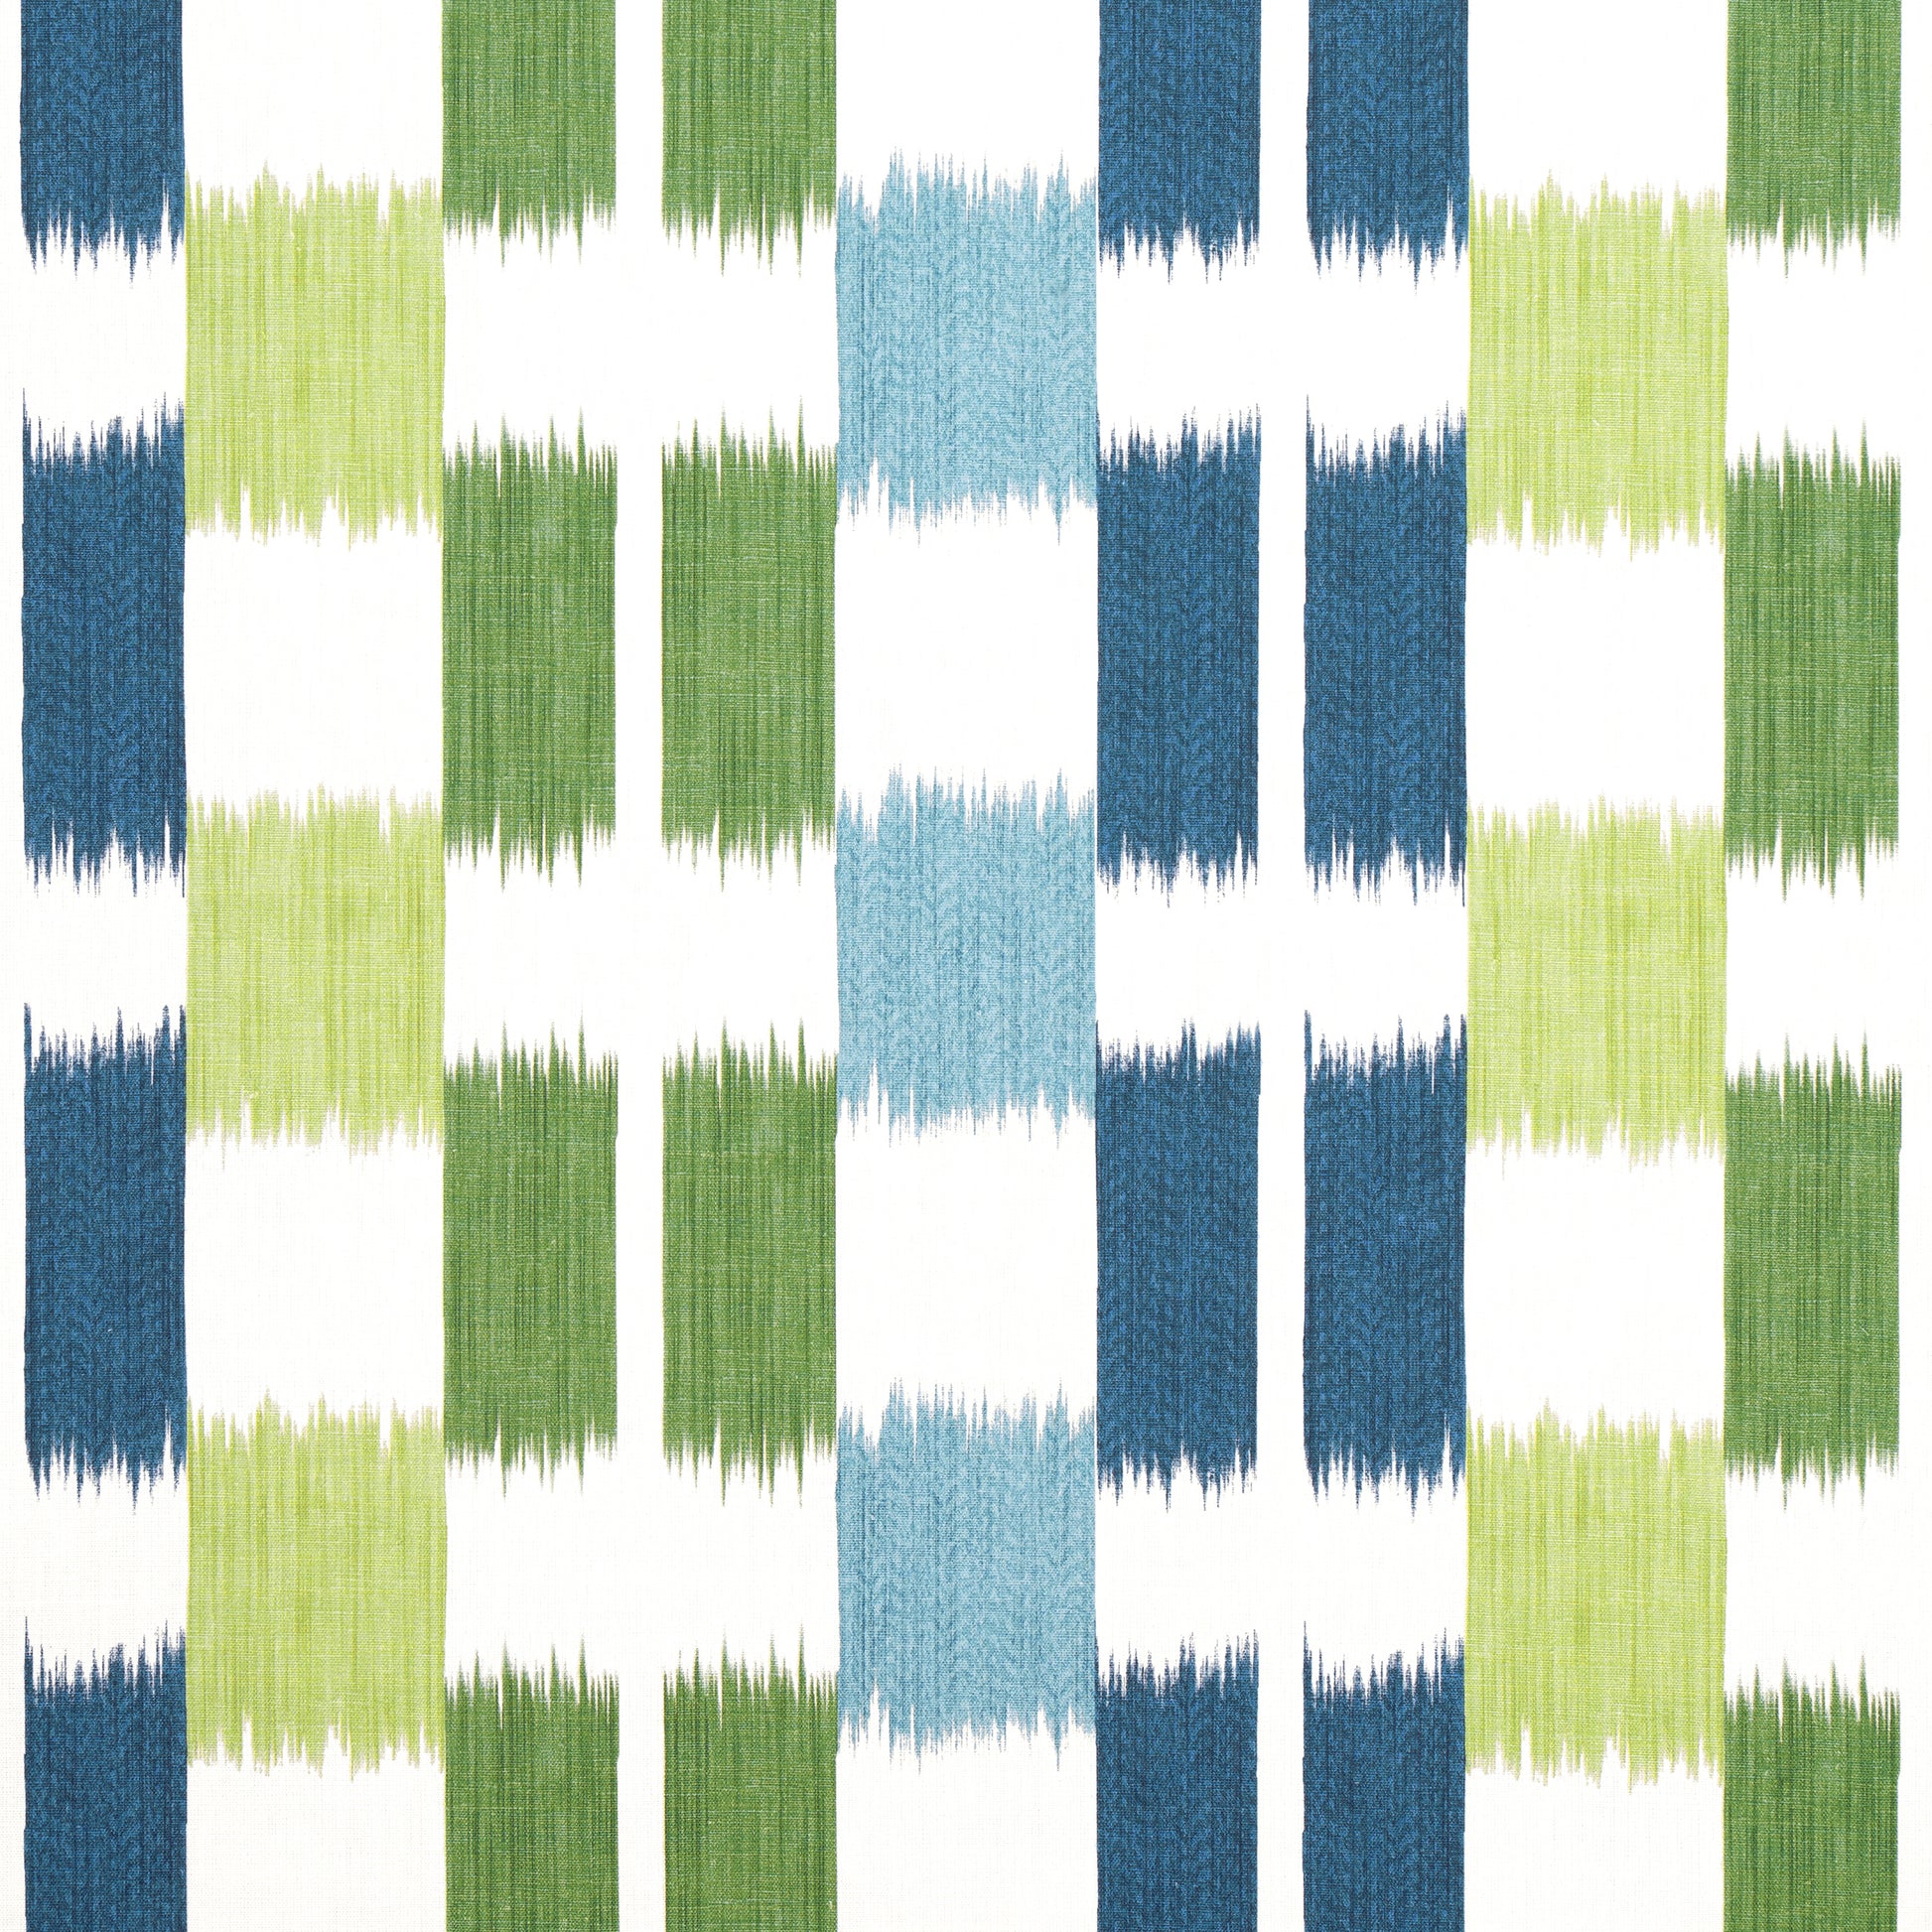 Purchase Thibaut Fabric Item F920839 pattern name Kasuri color Blue and Green